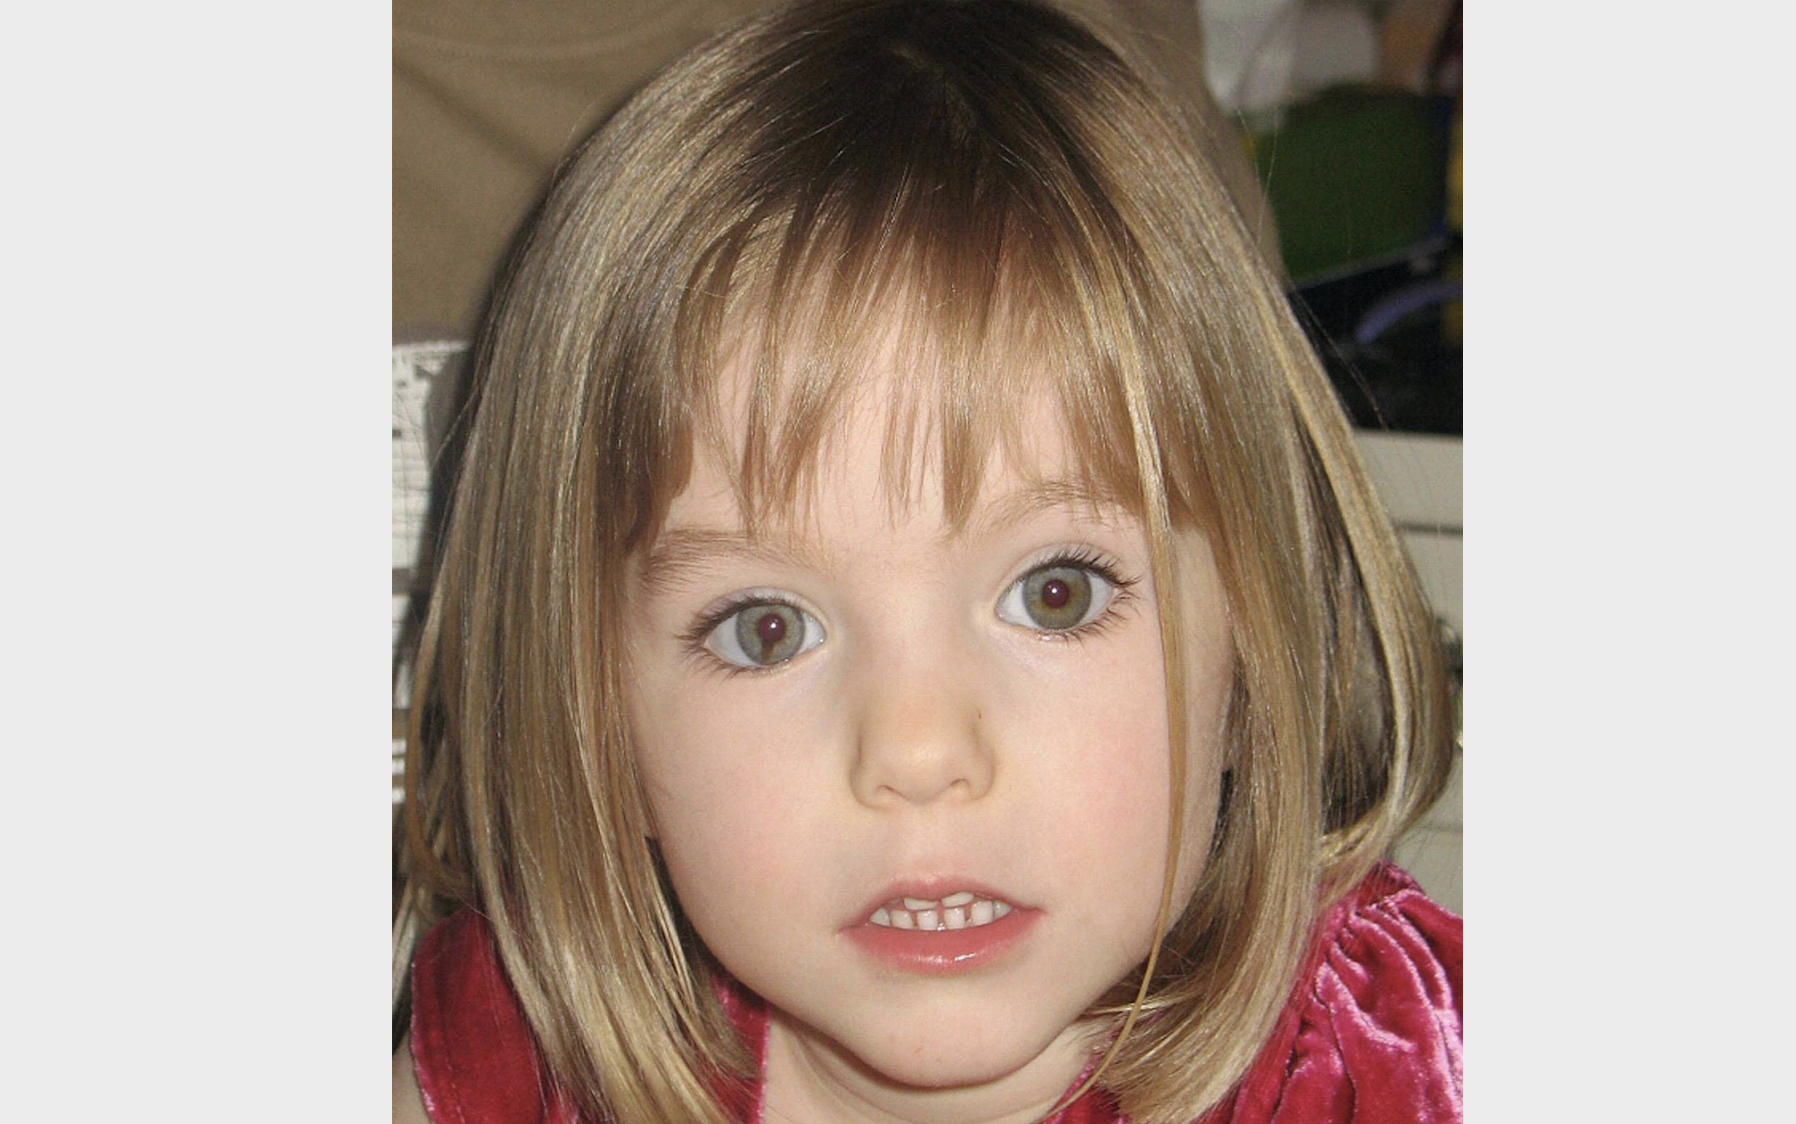 Madeleine McCann latest: What we know and don't know so far